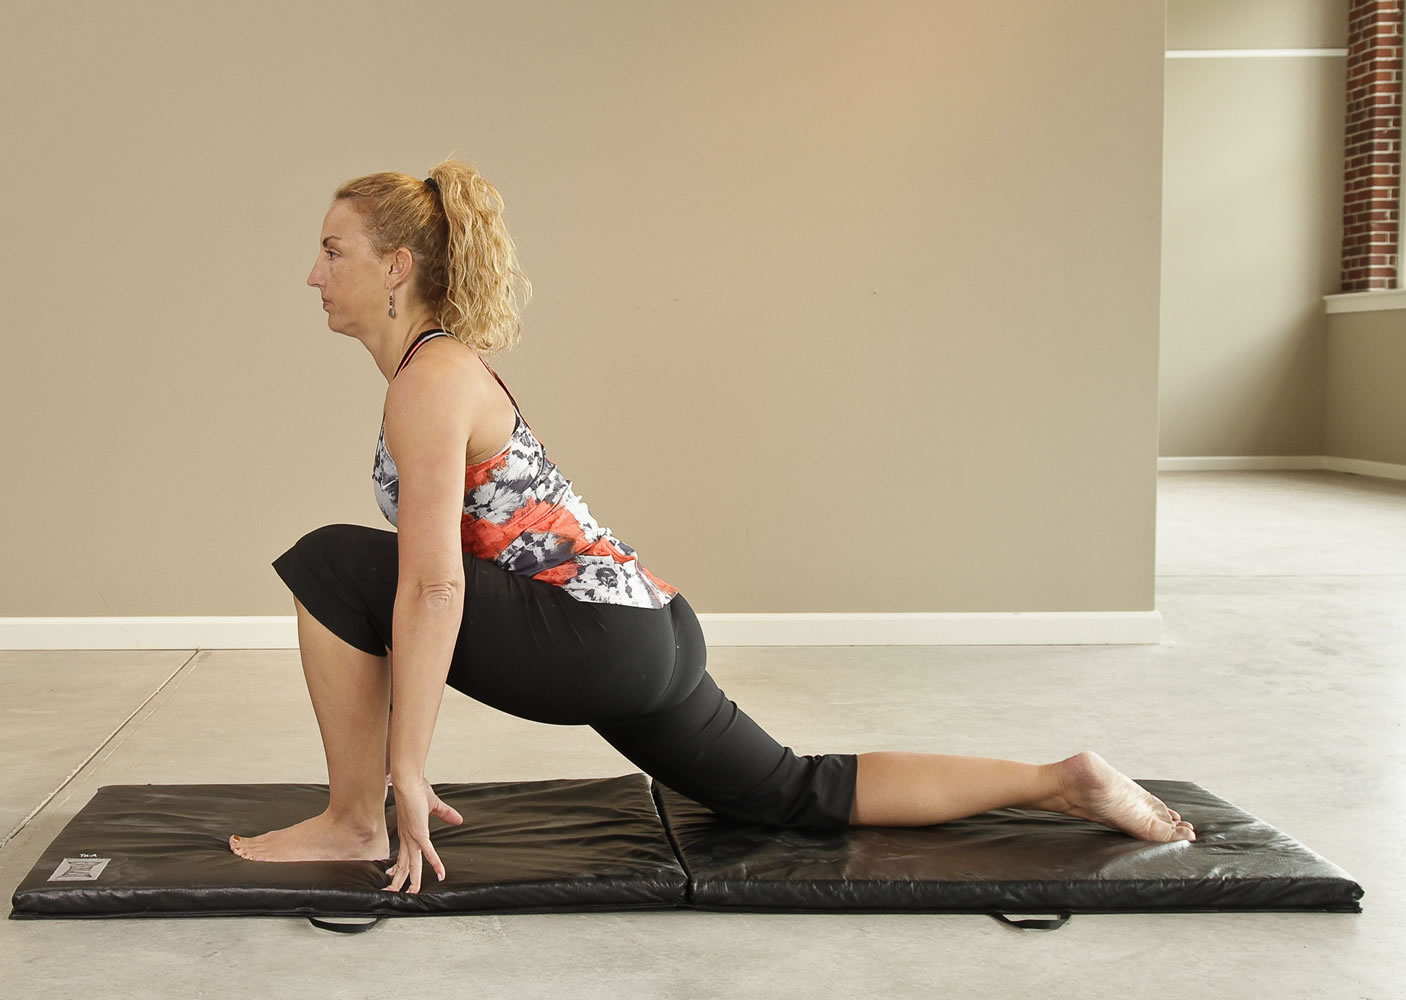 Hip flexor. Position yourself in a lunge position with your front knee positioned over the front ankle and your back knee positioned comfortably on a mat or towel.  Straighten your spine so your posture is fully erect. Lightly press the hip forward.